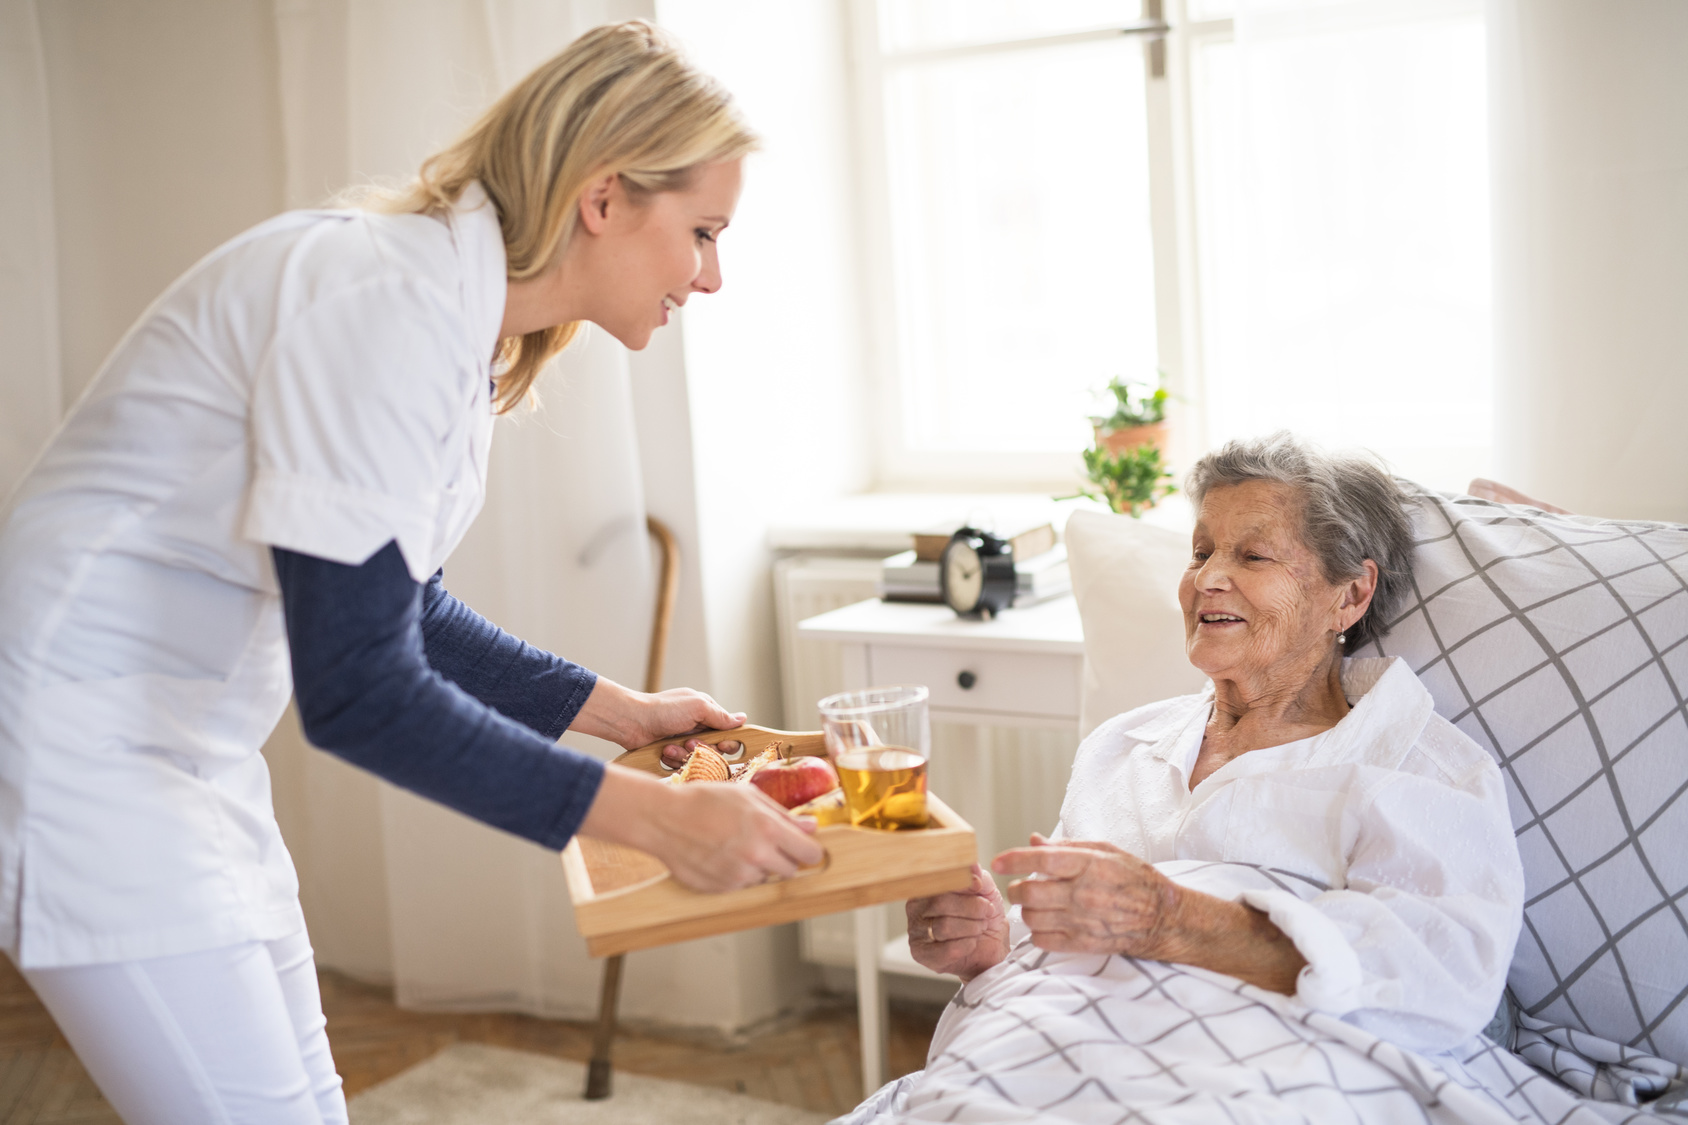 Six Caregiver Survival Tips For Busy Home Health Workers